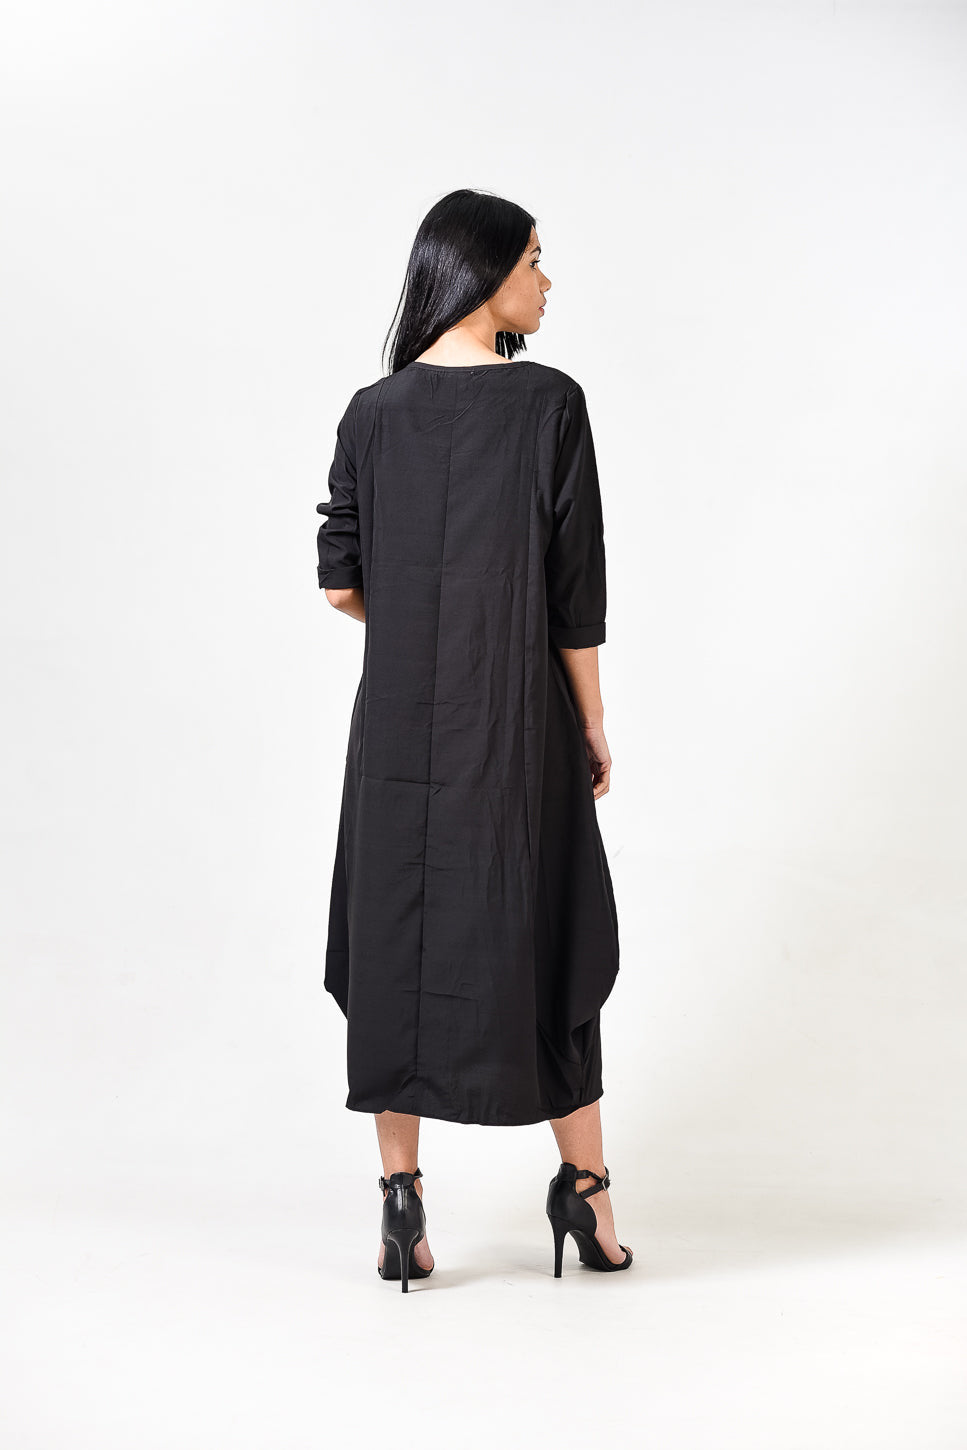 Solid Round Neck A Line Dress - XD21